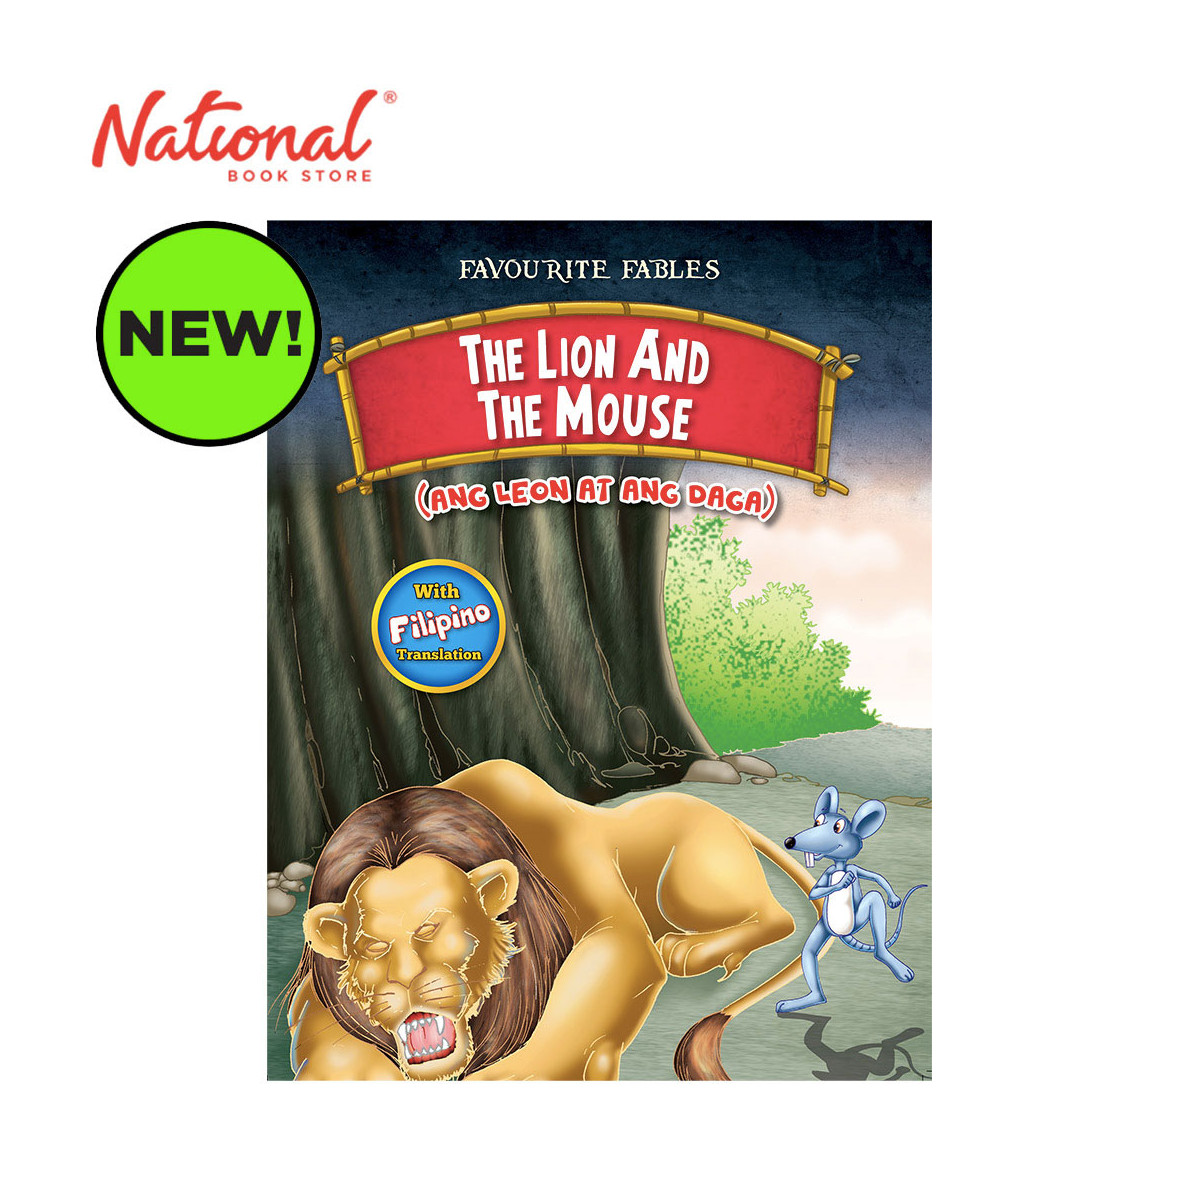 The Lion And The Mouse Bilingual - Trade Paperback